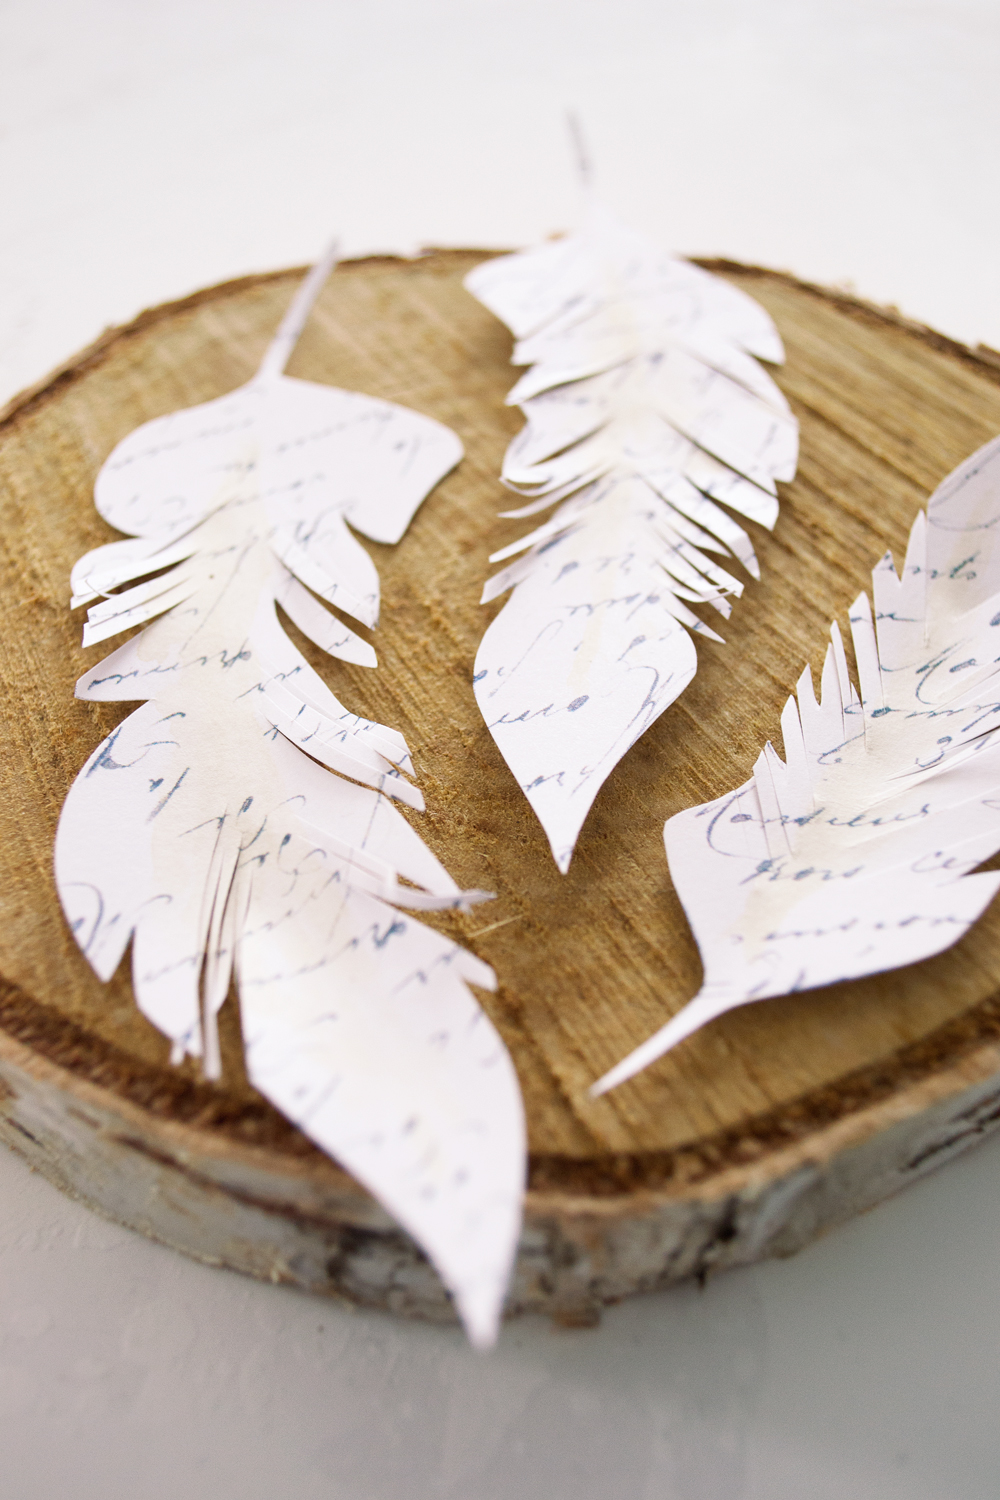 DIY French Script Paper Feathers - free printable